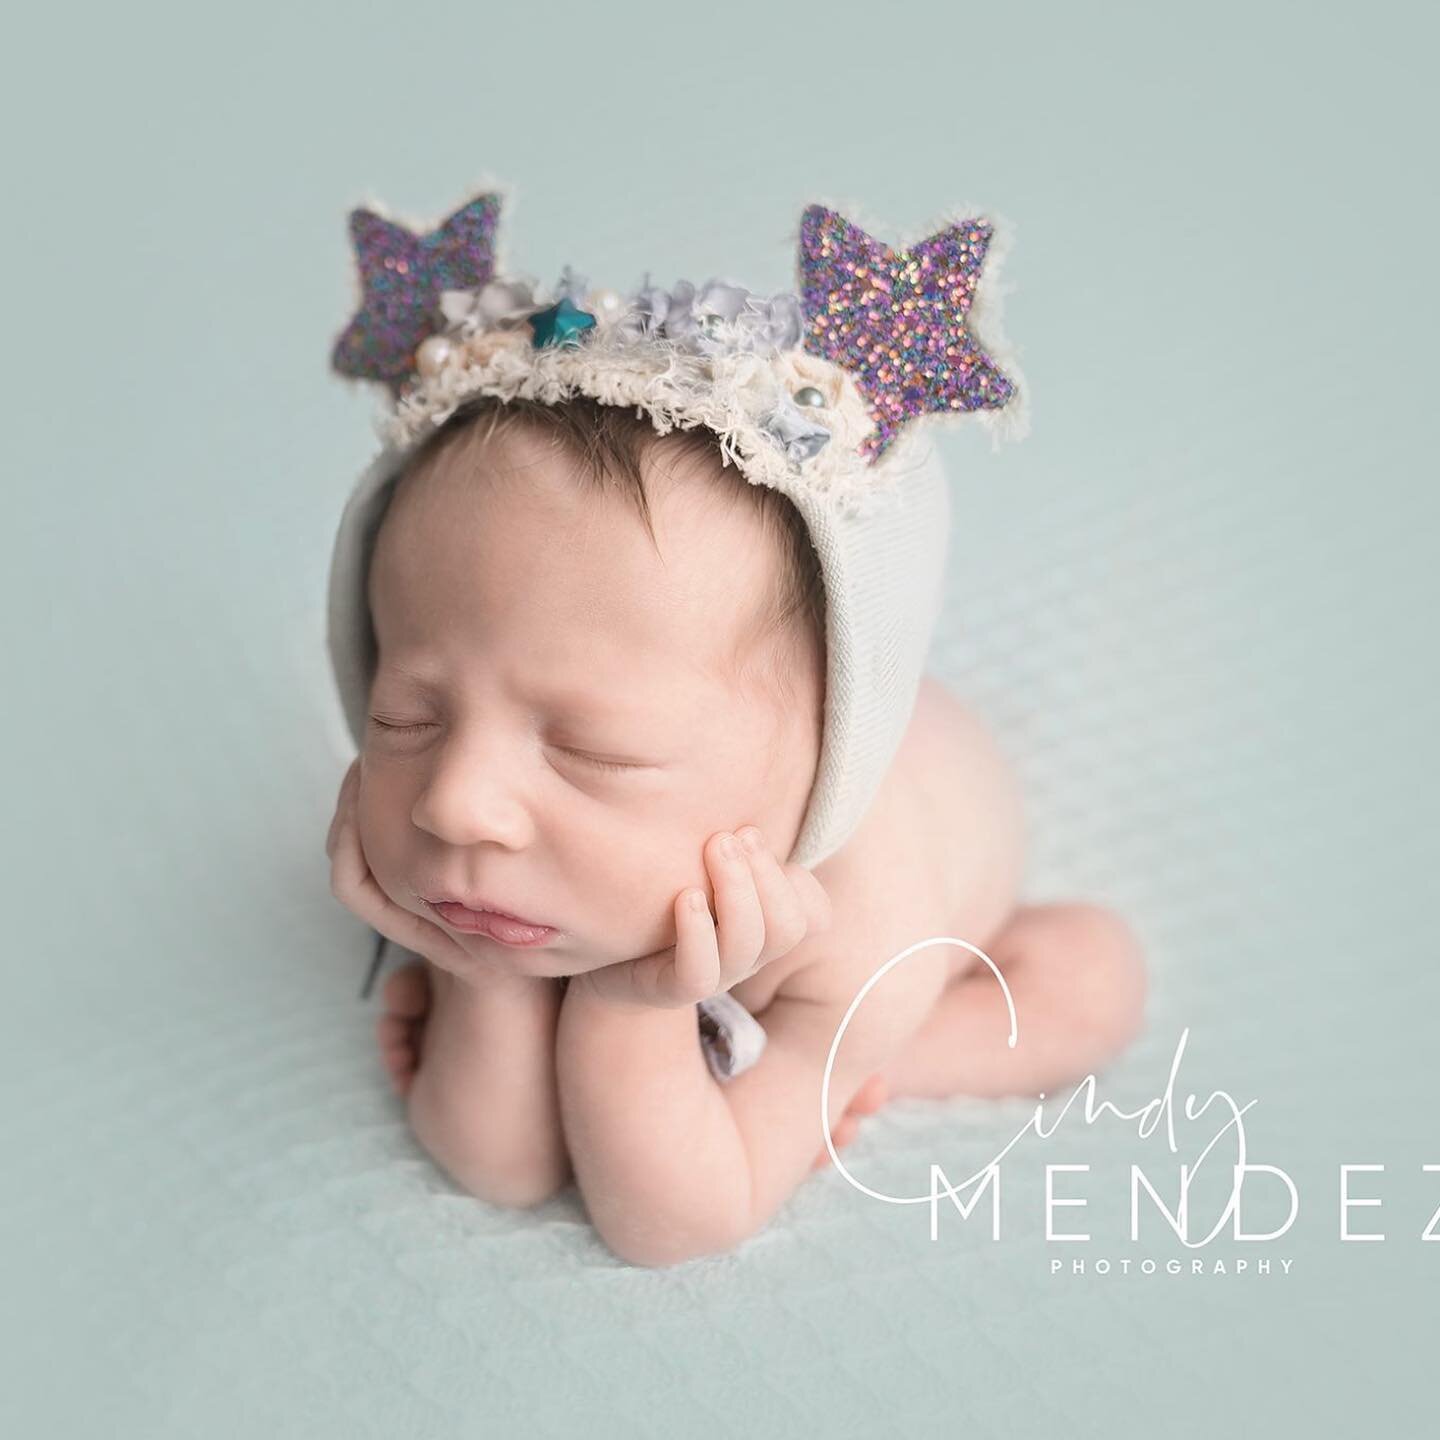 This little peanut decided to arrive a few weeks early and didn't disappoint! Slept pretty much the entire time! #cindymendezphotography #newbornphotography #newbornphotographer #newbornphotographers #newborn #newborns #baby #babies #newbornpictures 